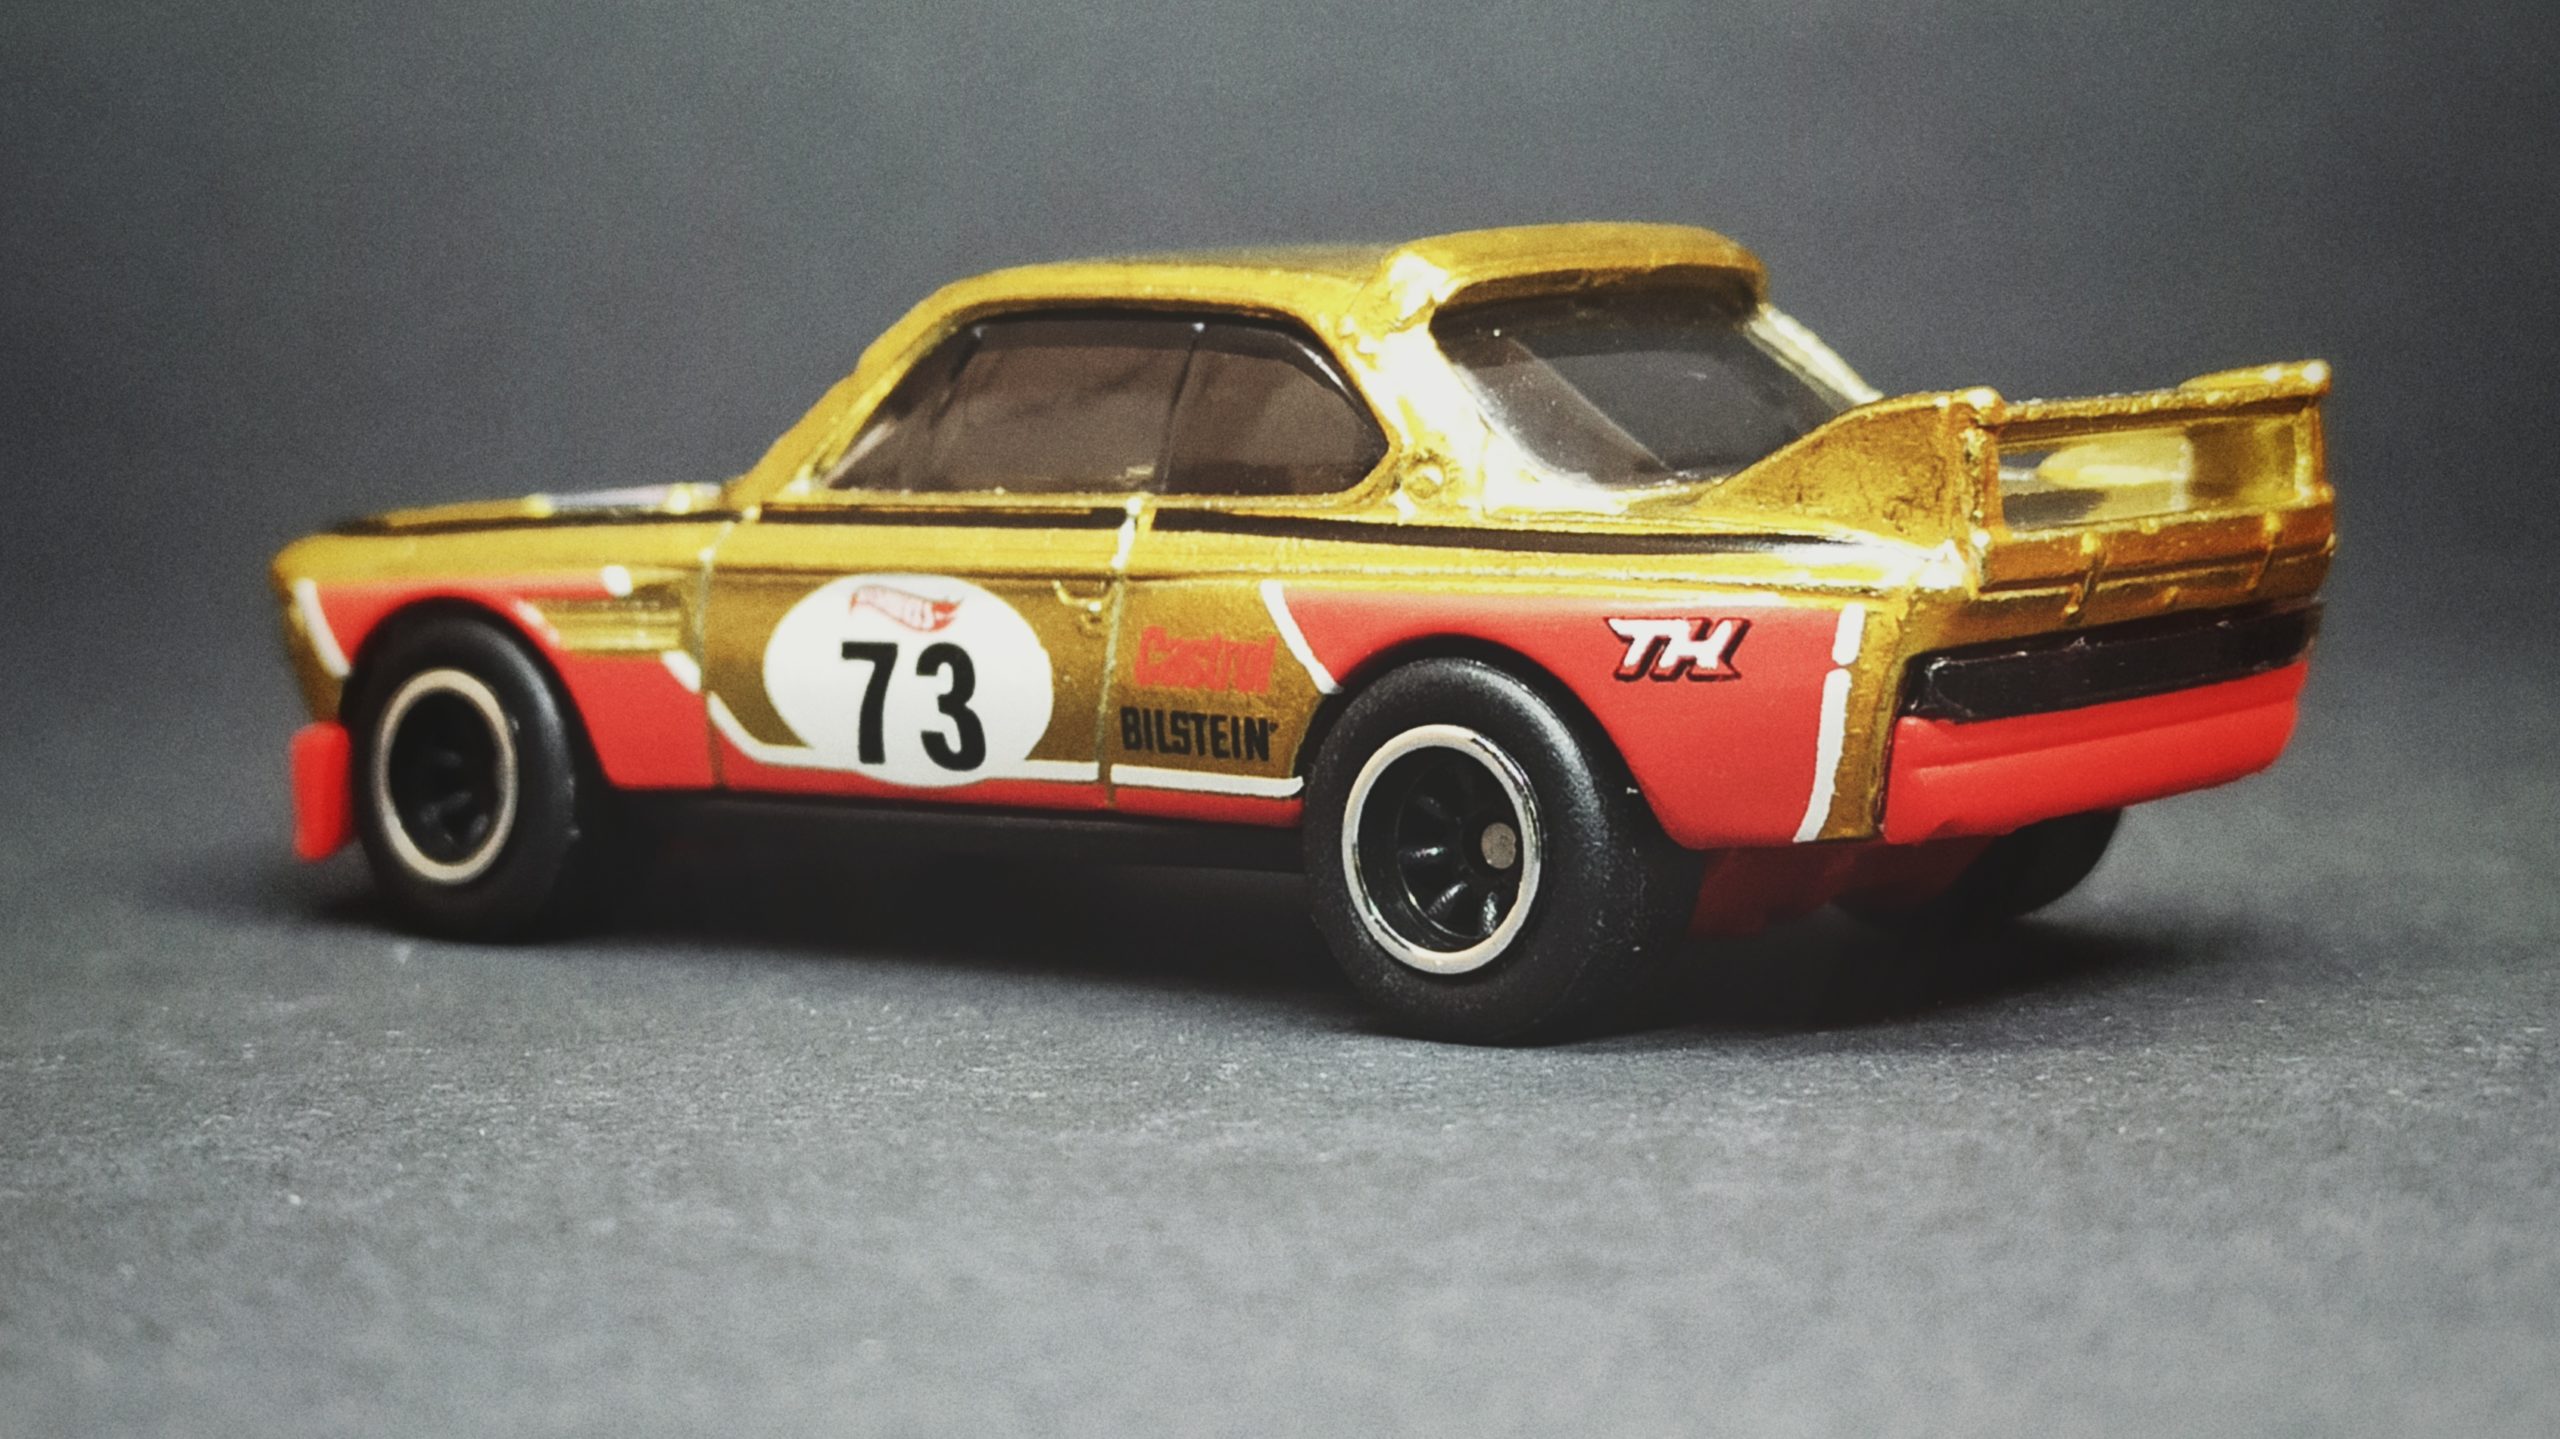 Hot Wheels '73 BMW 3.0 CSL Race Car (HCY20) 2022 (34/250) Retro Racers (2/10) spectraflame yellow (gold) Super Treasure Hunt (STH) side angle